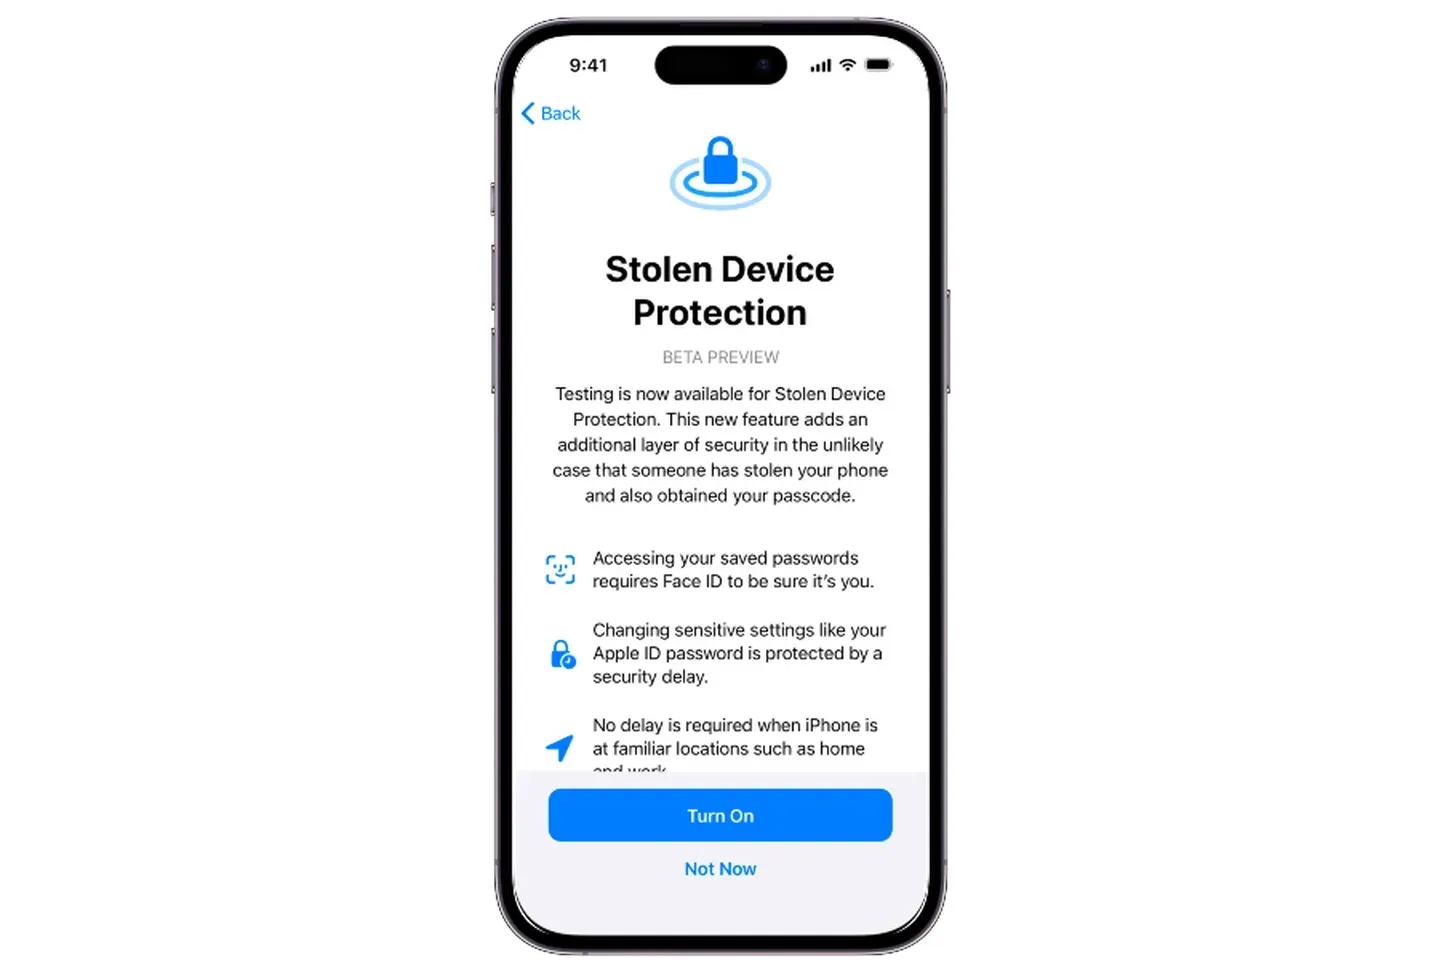 Some of the important features of iOS 17.3 include Stolen Device Protection